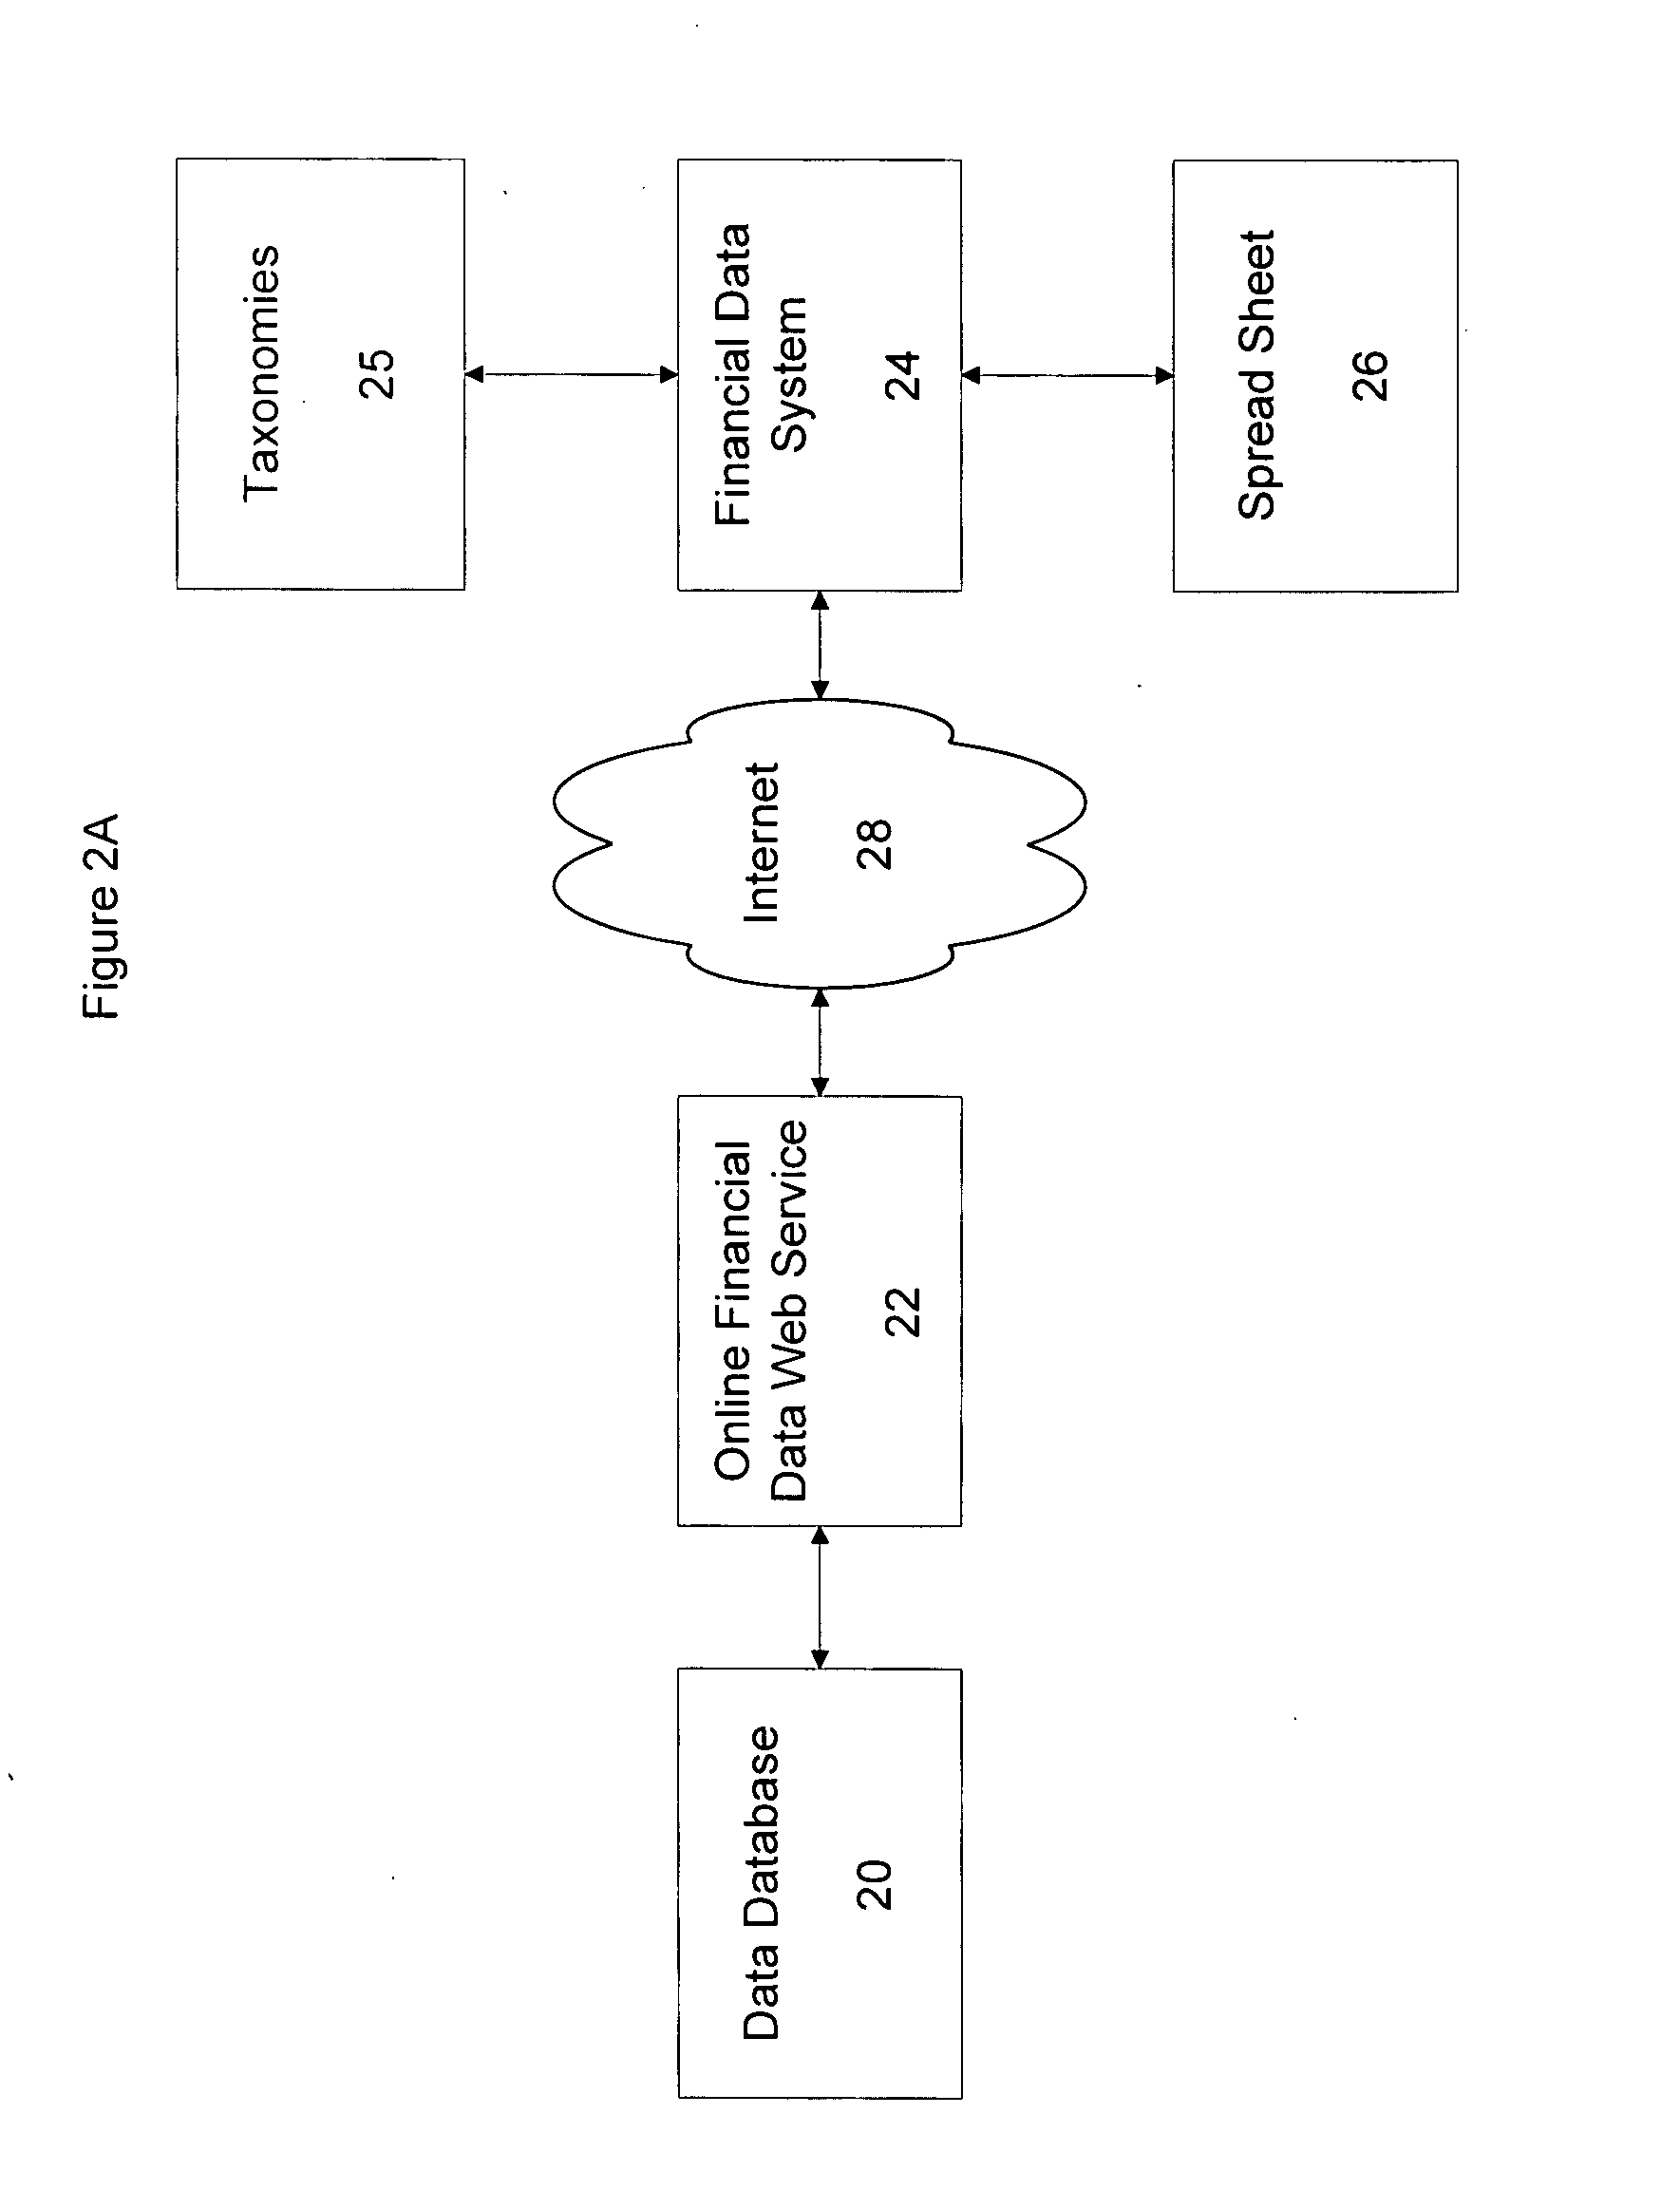 System and method for rendering data